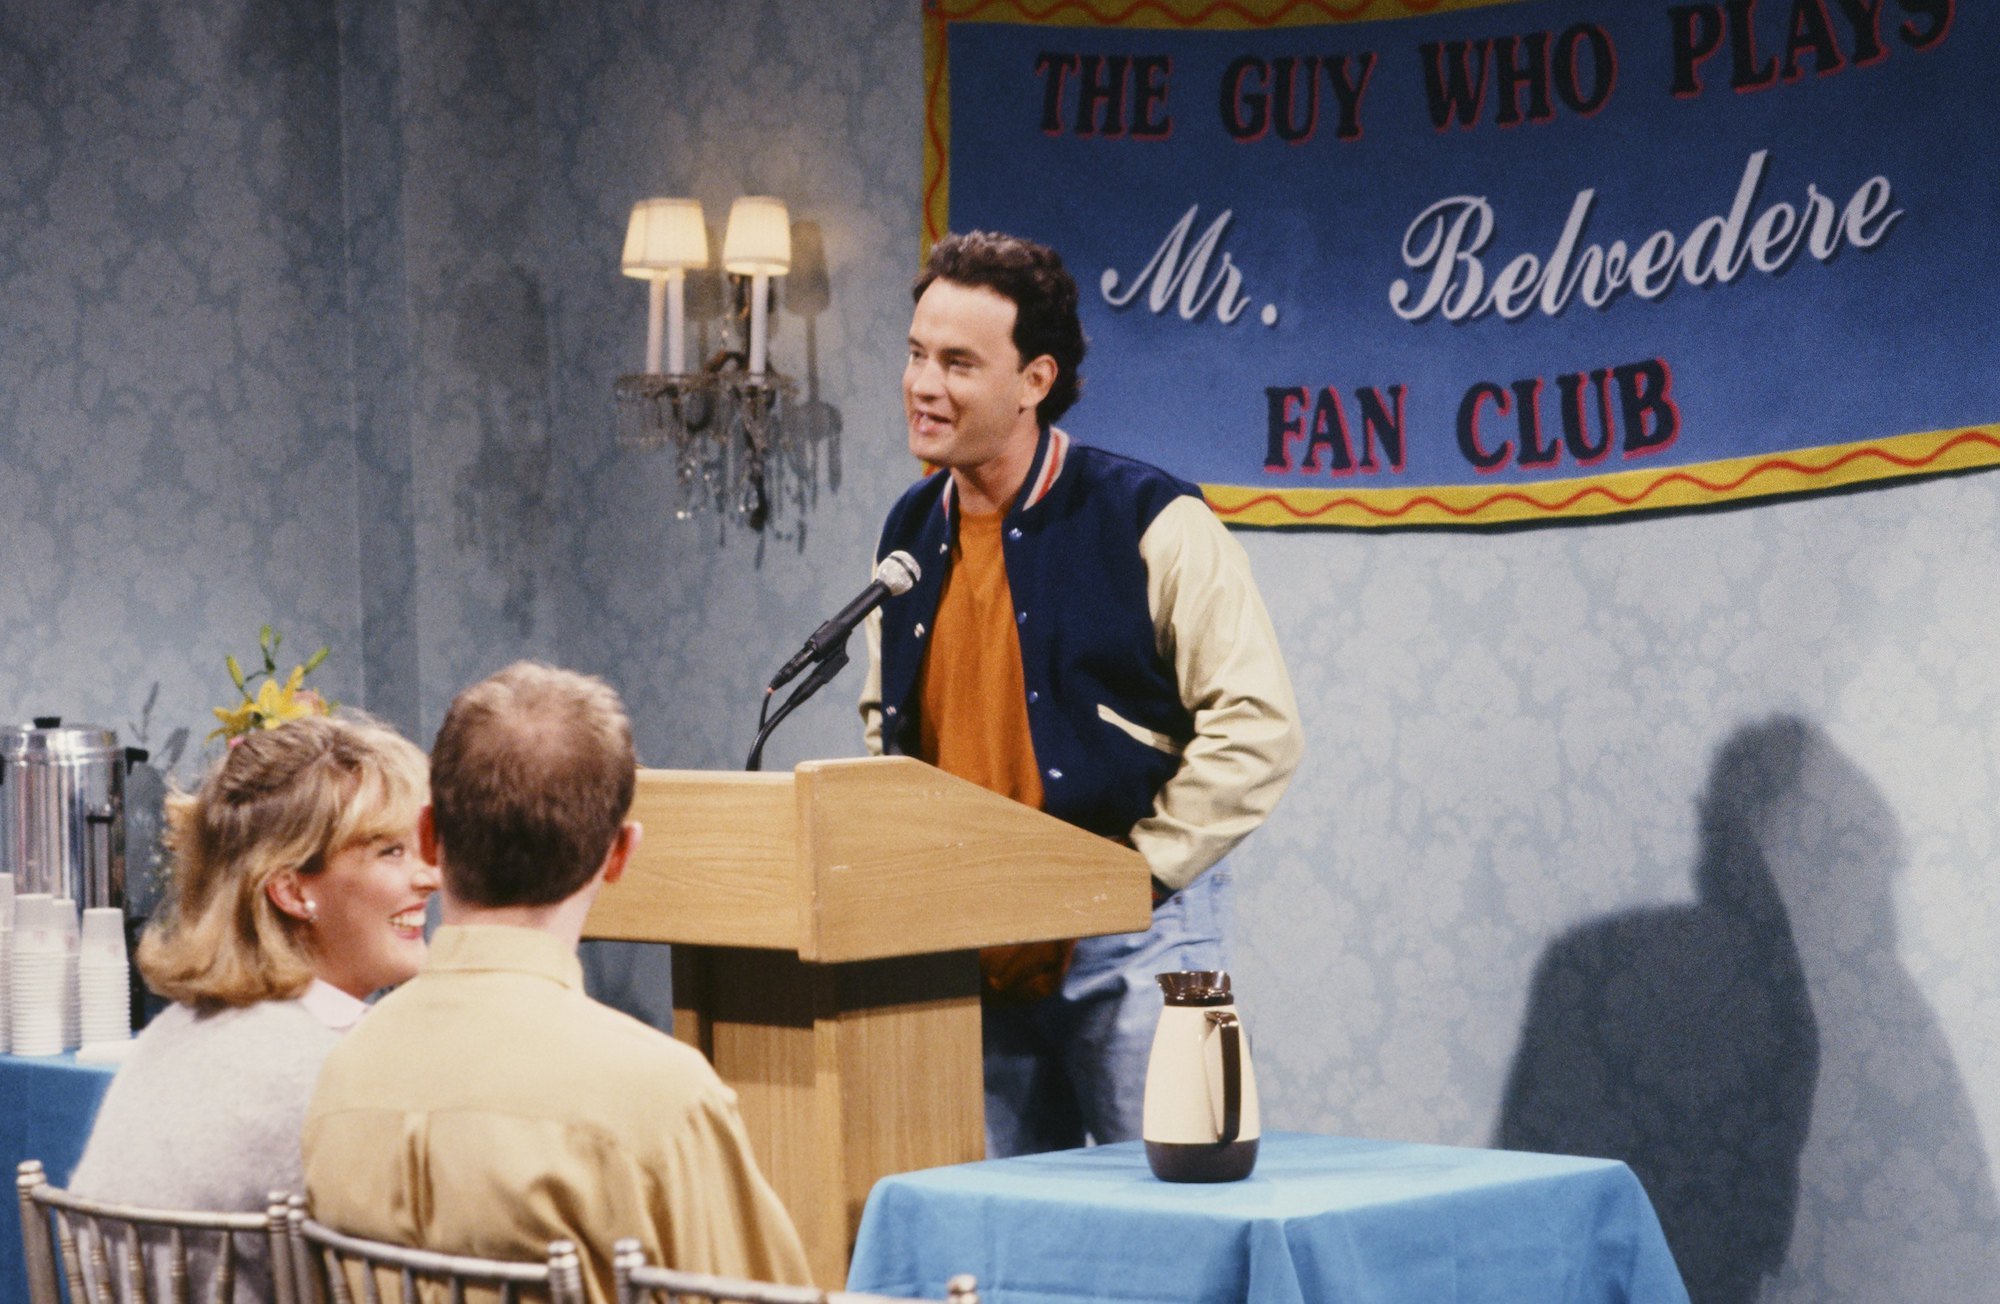 'Saturday Night Live' host Tom Hanks speaks at a podium for the Mr. Belvedere Fan Club sketch 